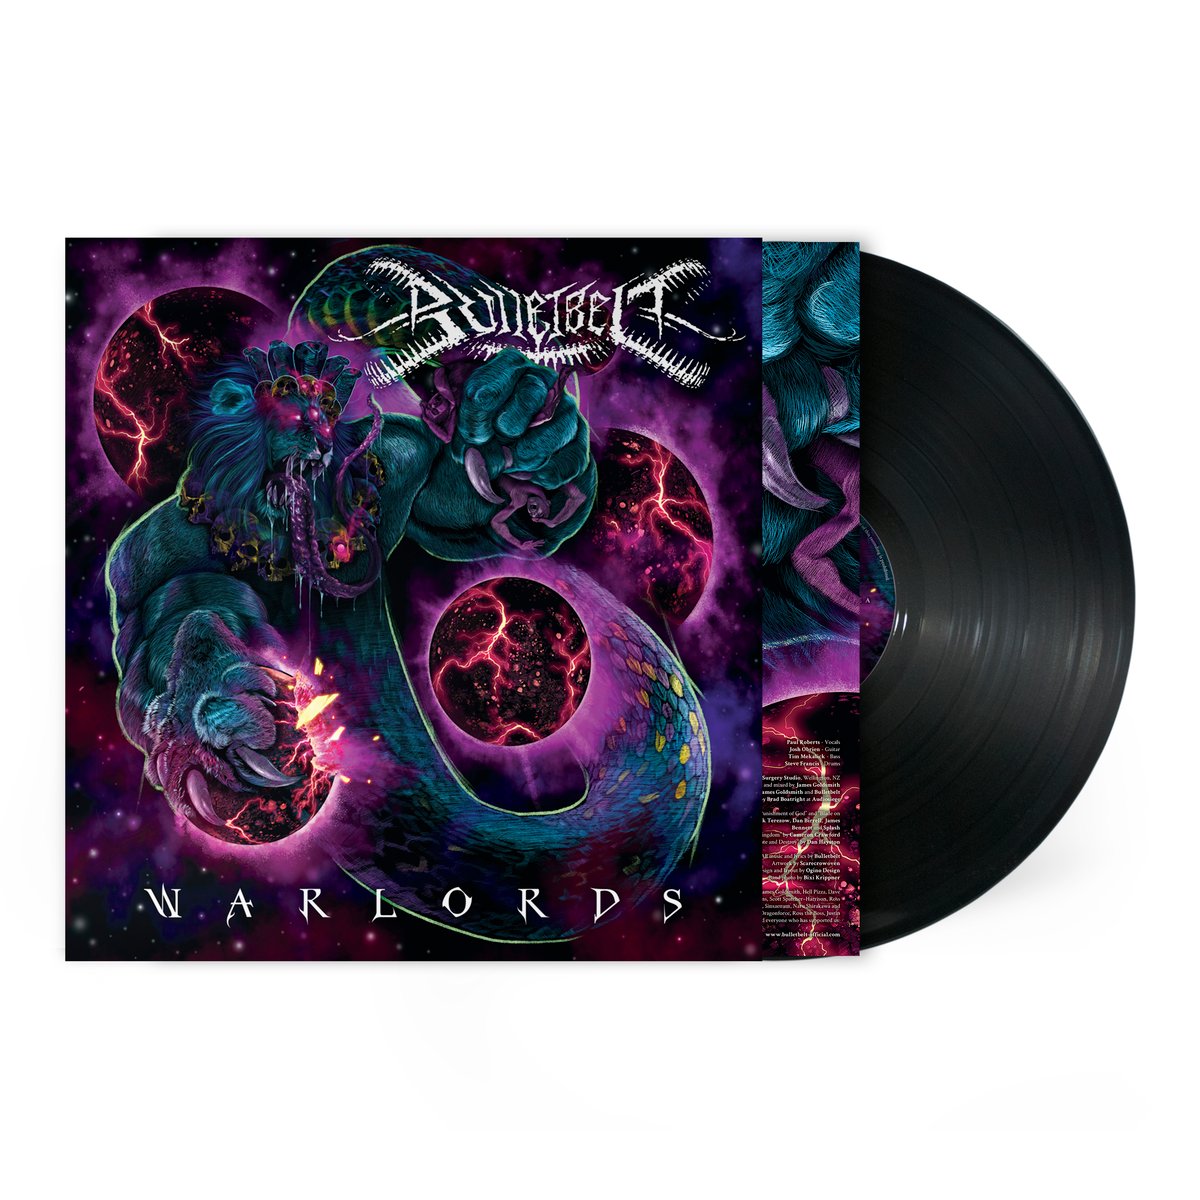 Image of Bulletbelt "Warlords" LP 